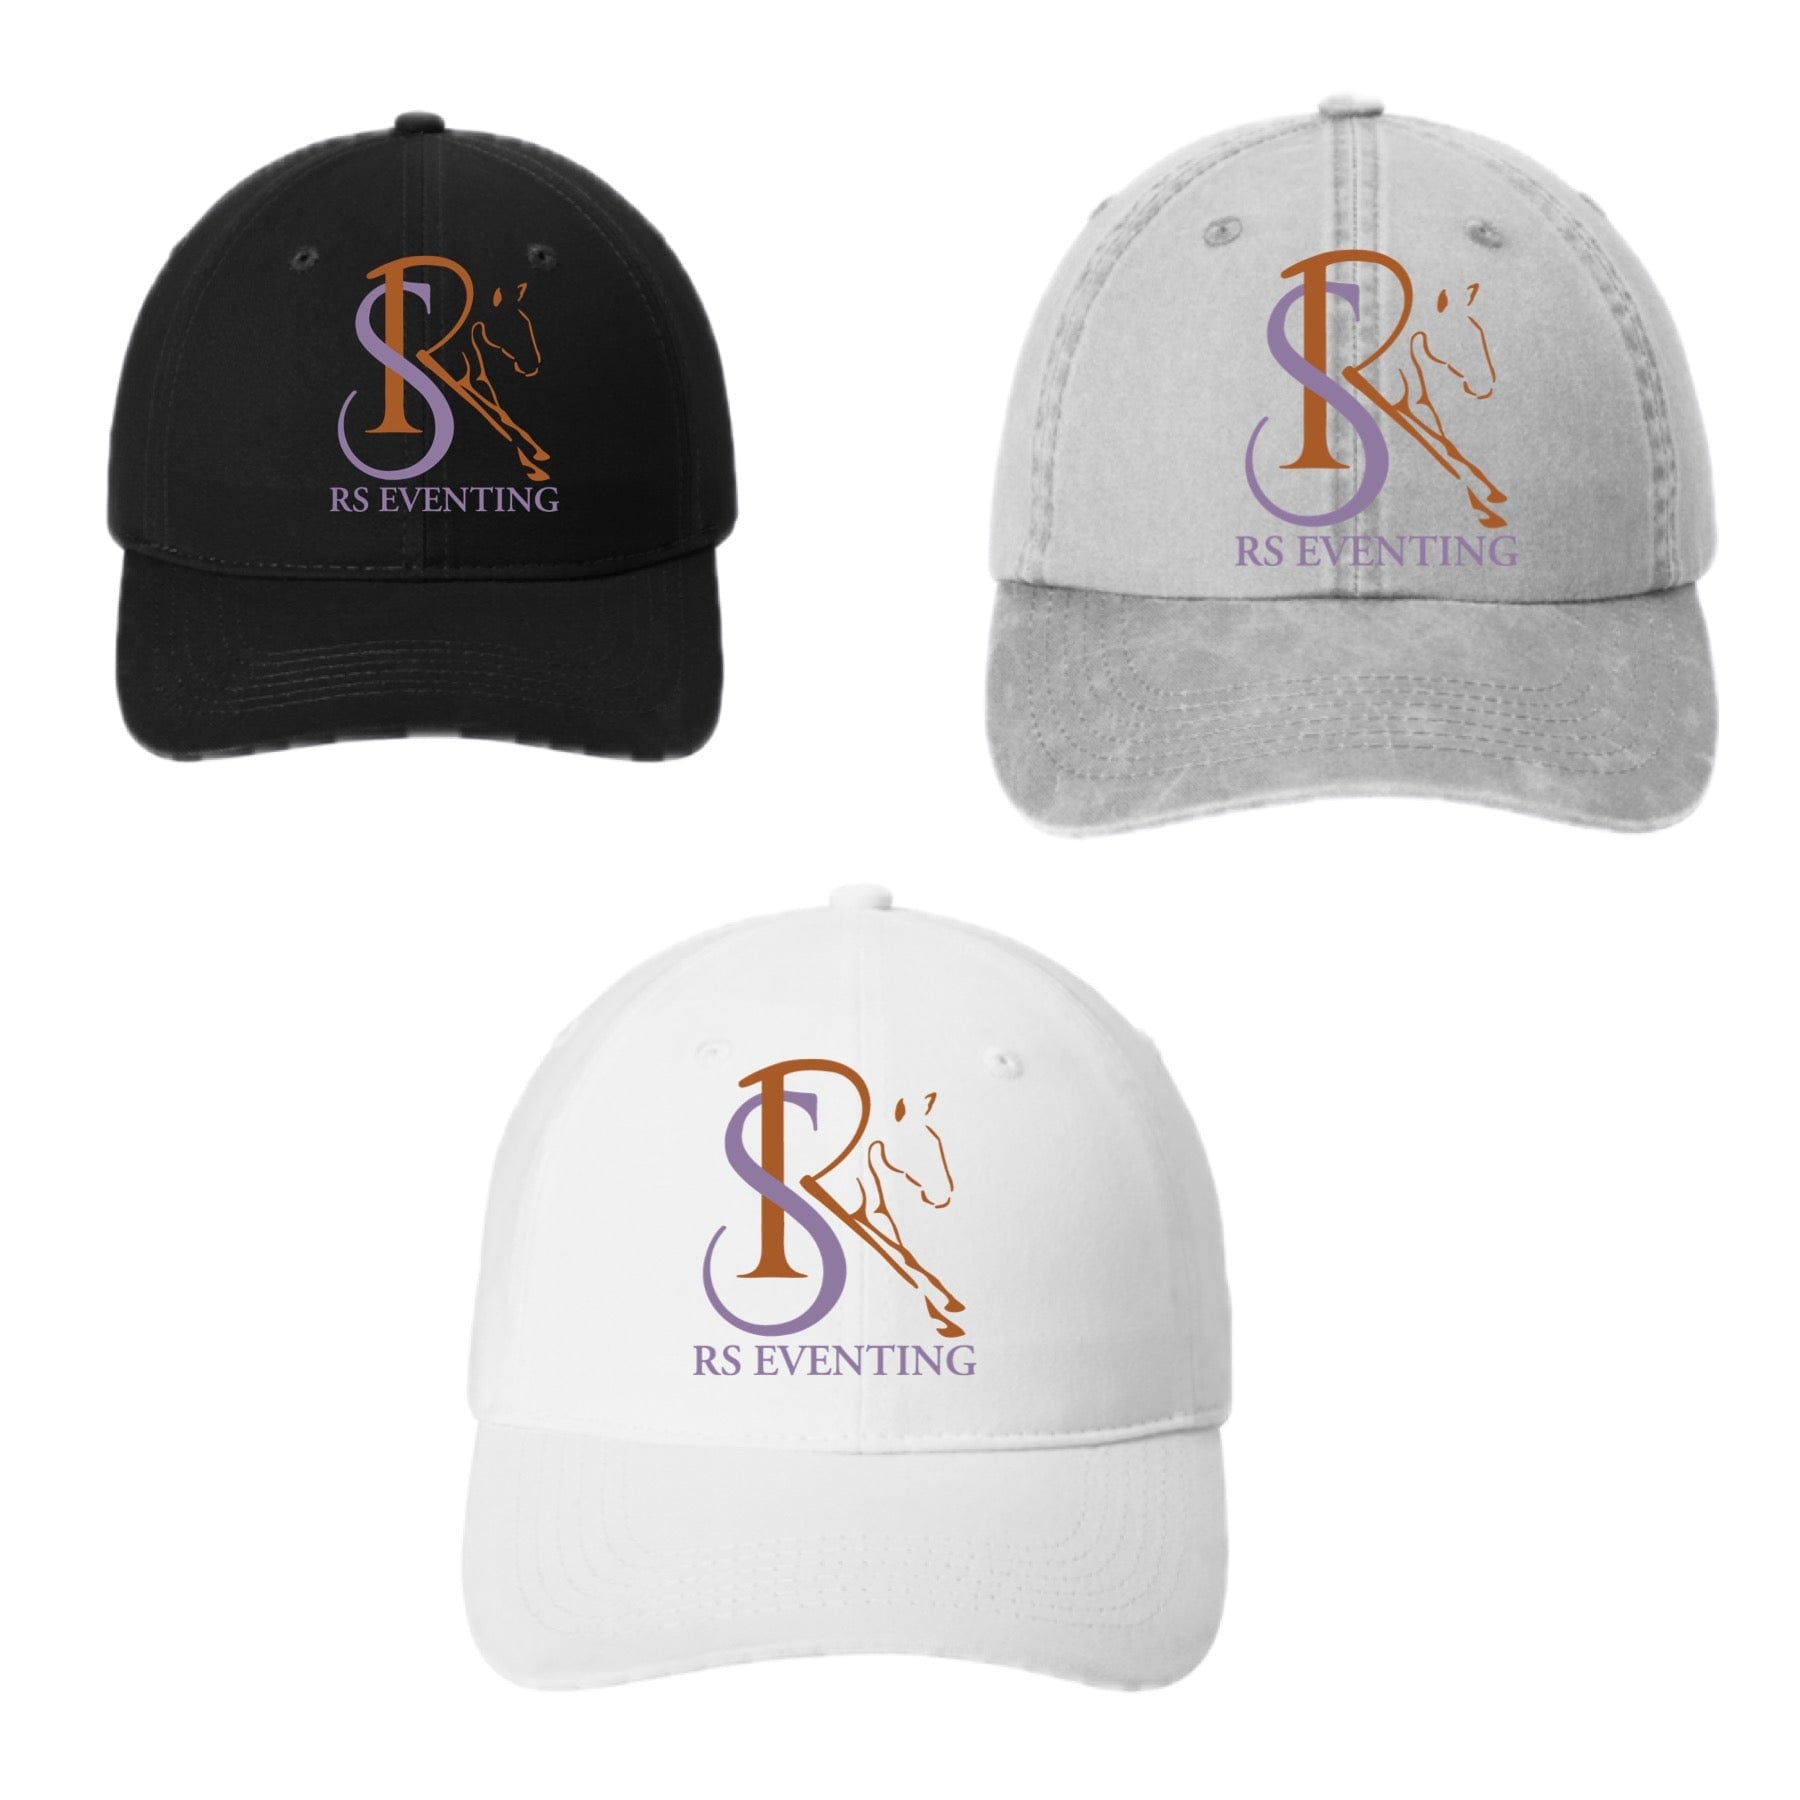 Equestrian Team Apparel RS Eventing Baseball Cap equestrian team apparel online tack store mobile tack store custom farm apparel custom show stable clothing equestrian lifestyle horse show clothing riding clothes horses equestrian tack store